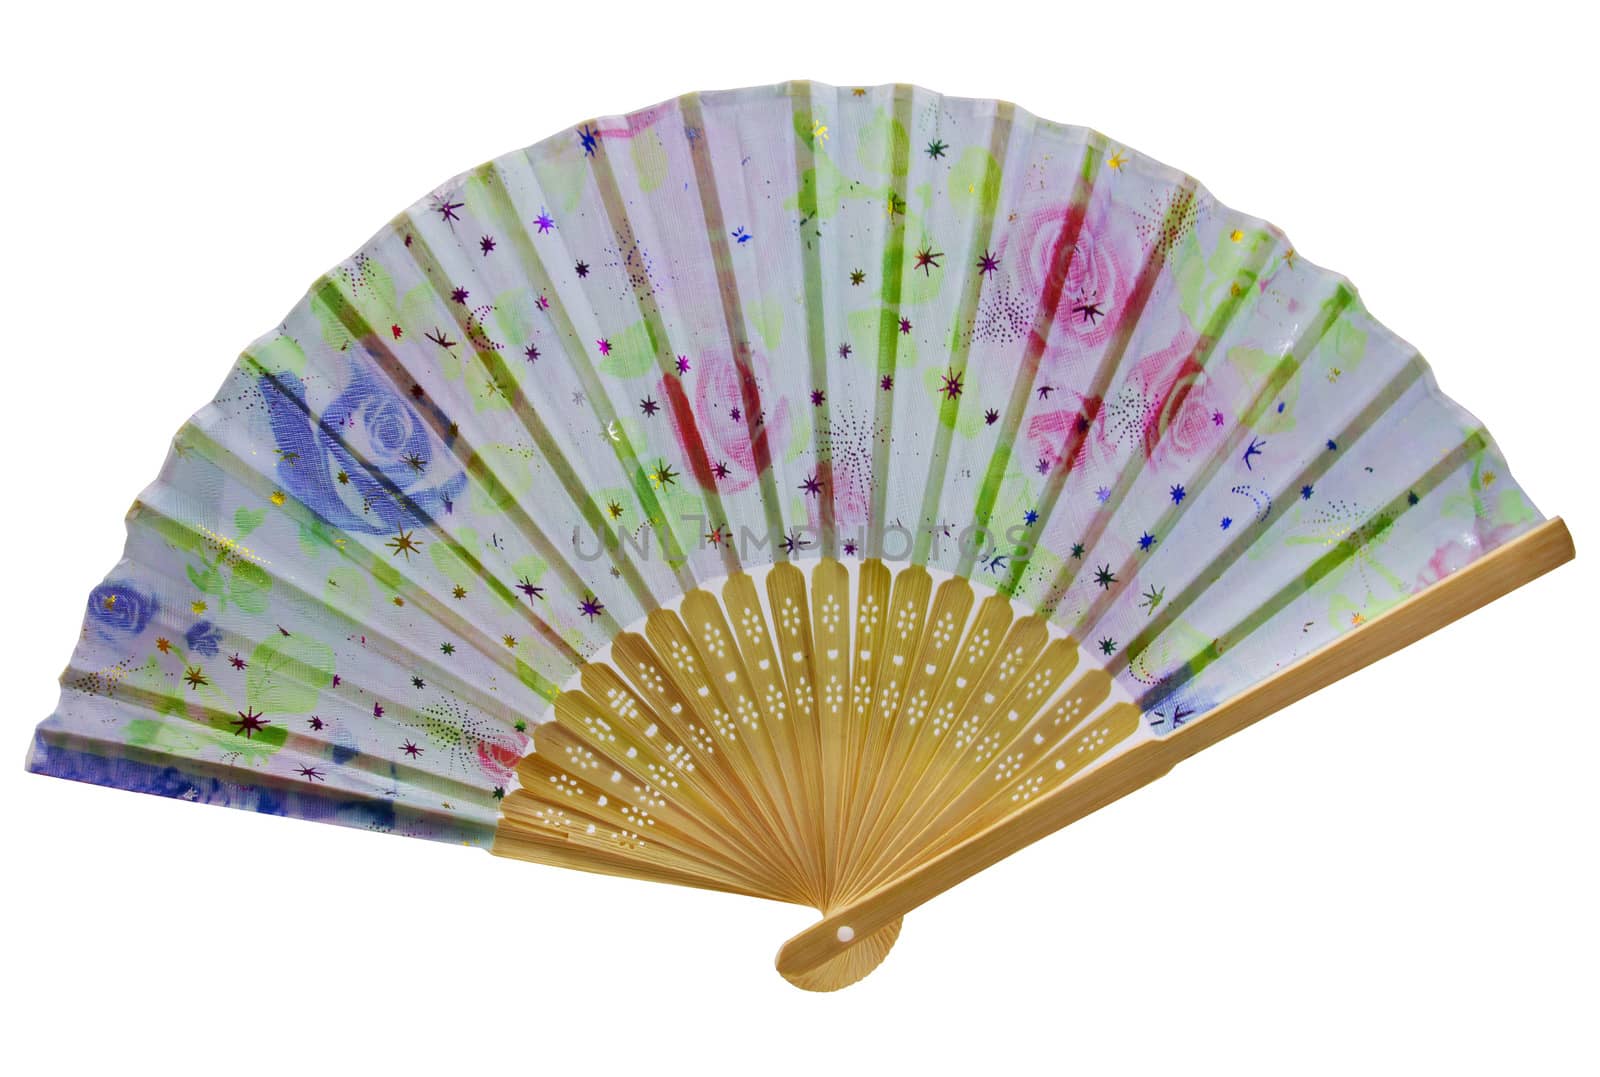 Japanese folding fan isolated on white background by sutipp11